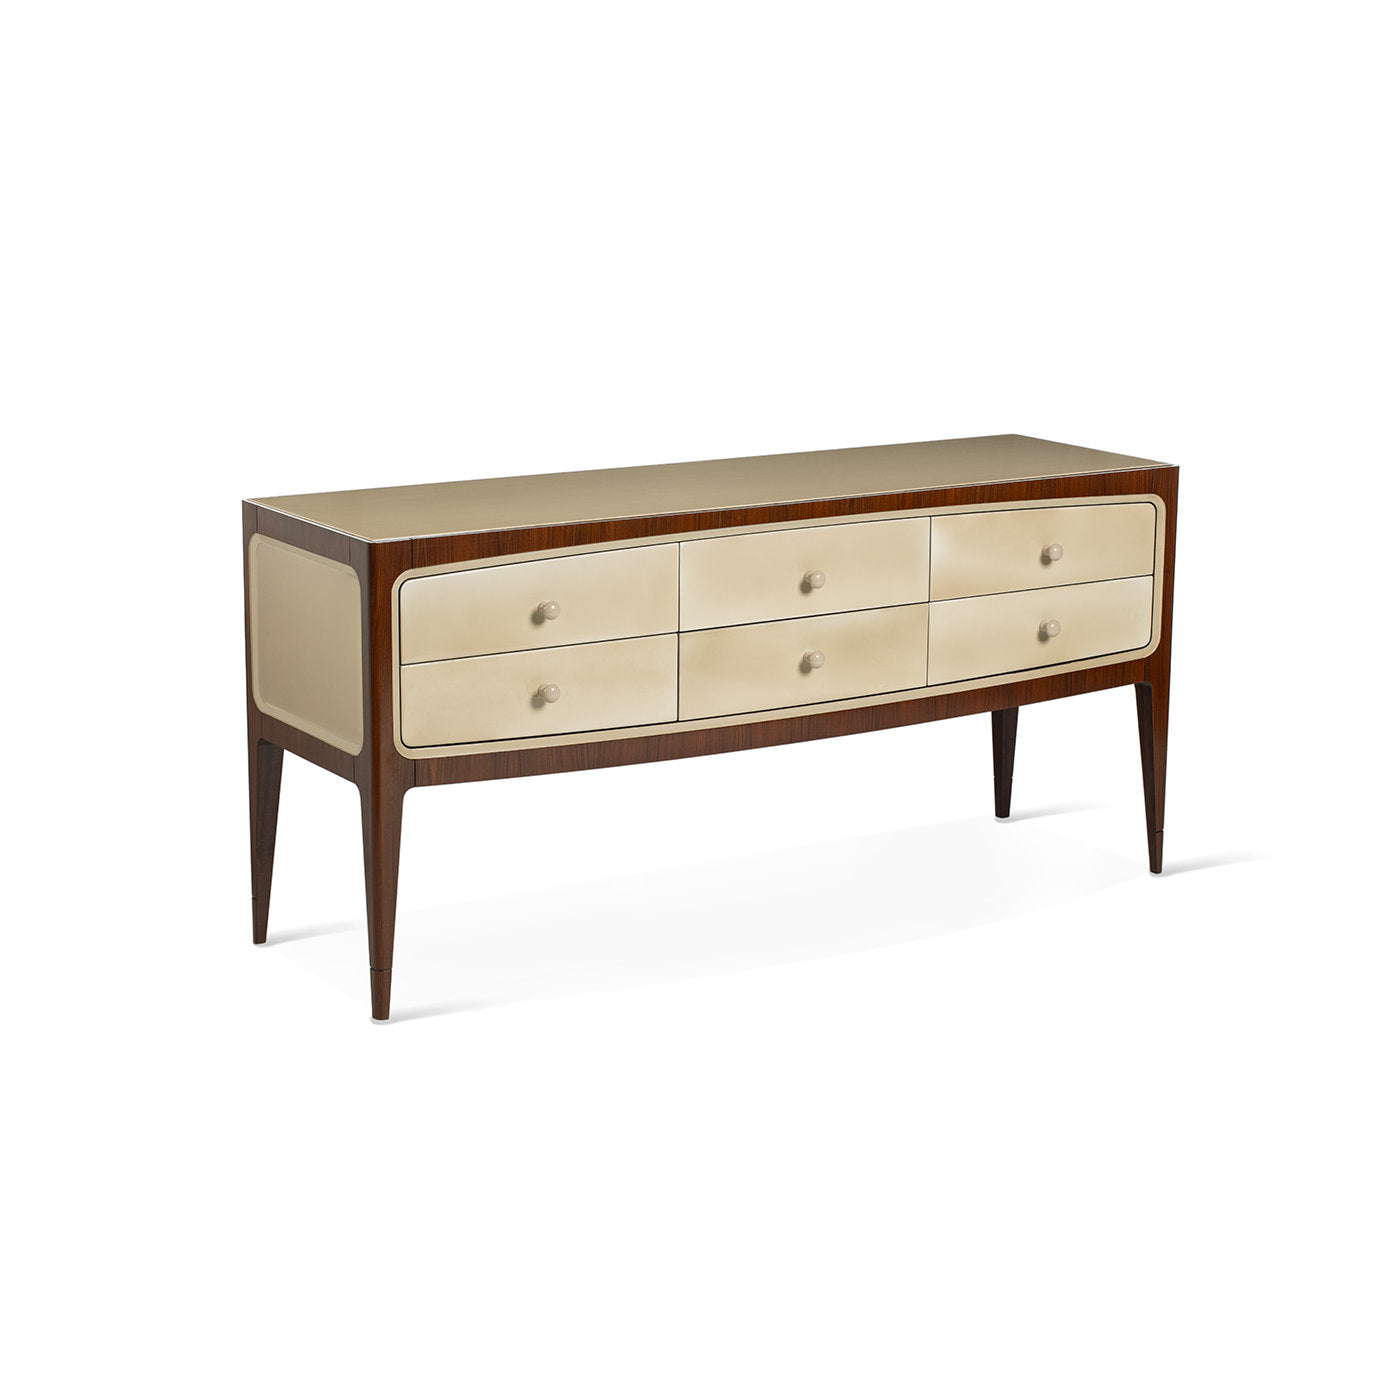 60s Style Beechwood Sideboard with Drawers 8712 - Alternative view 1